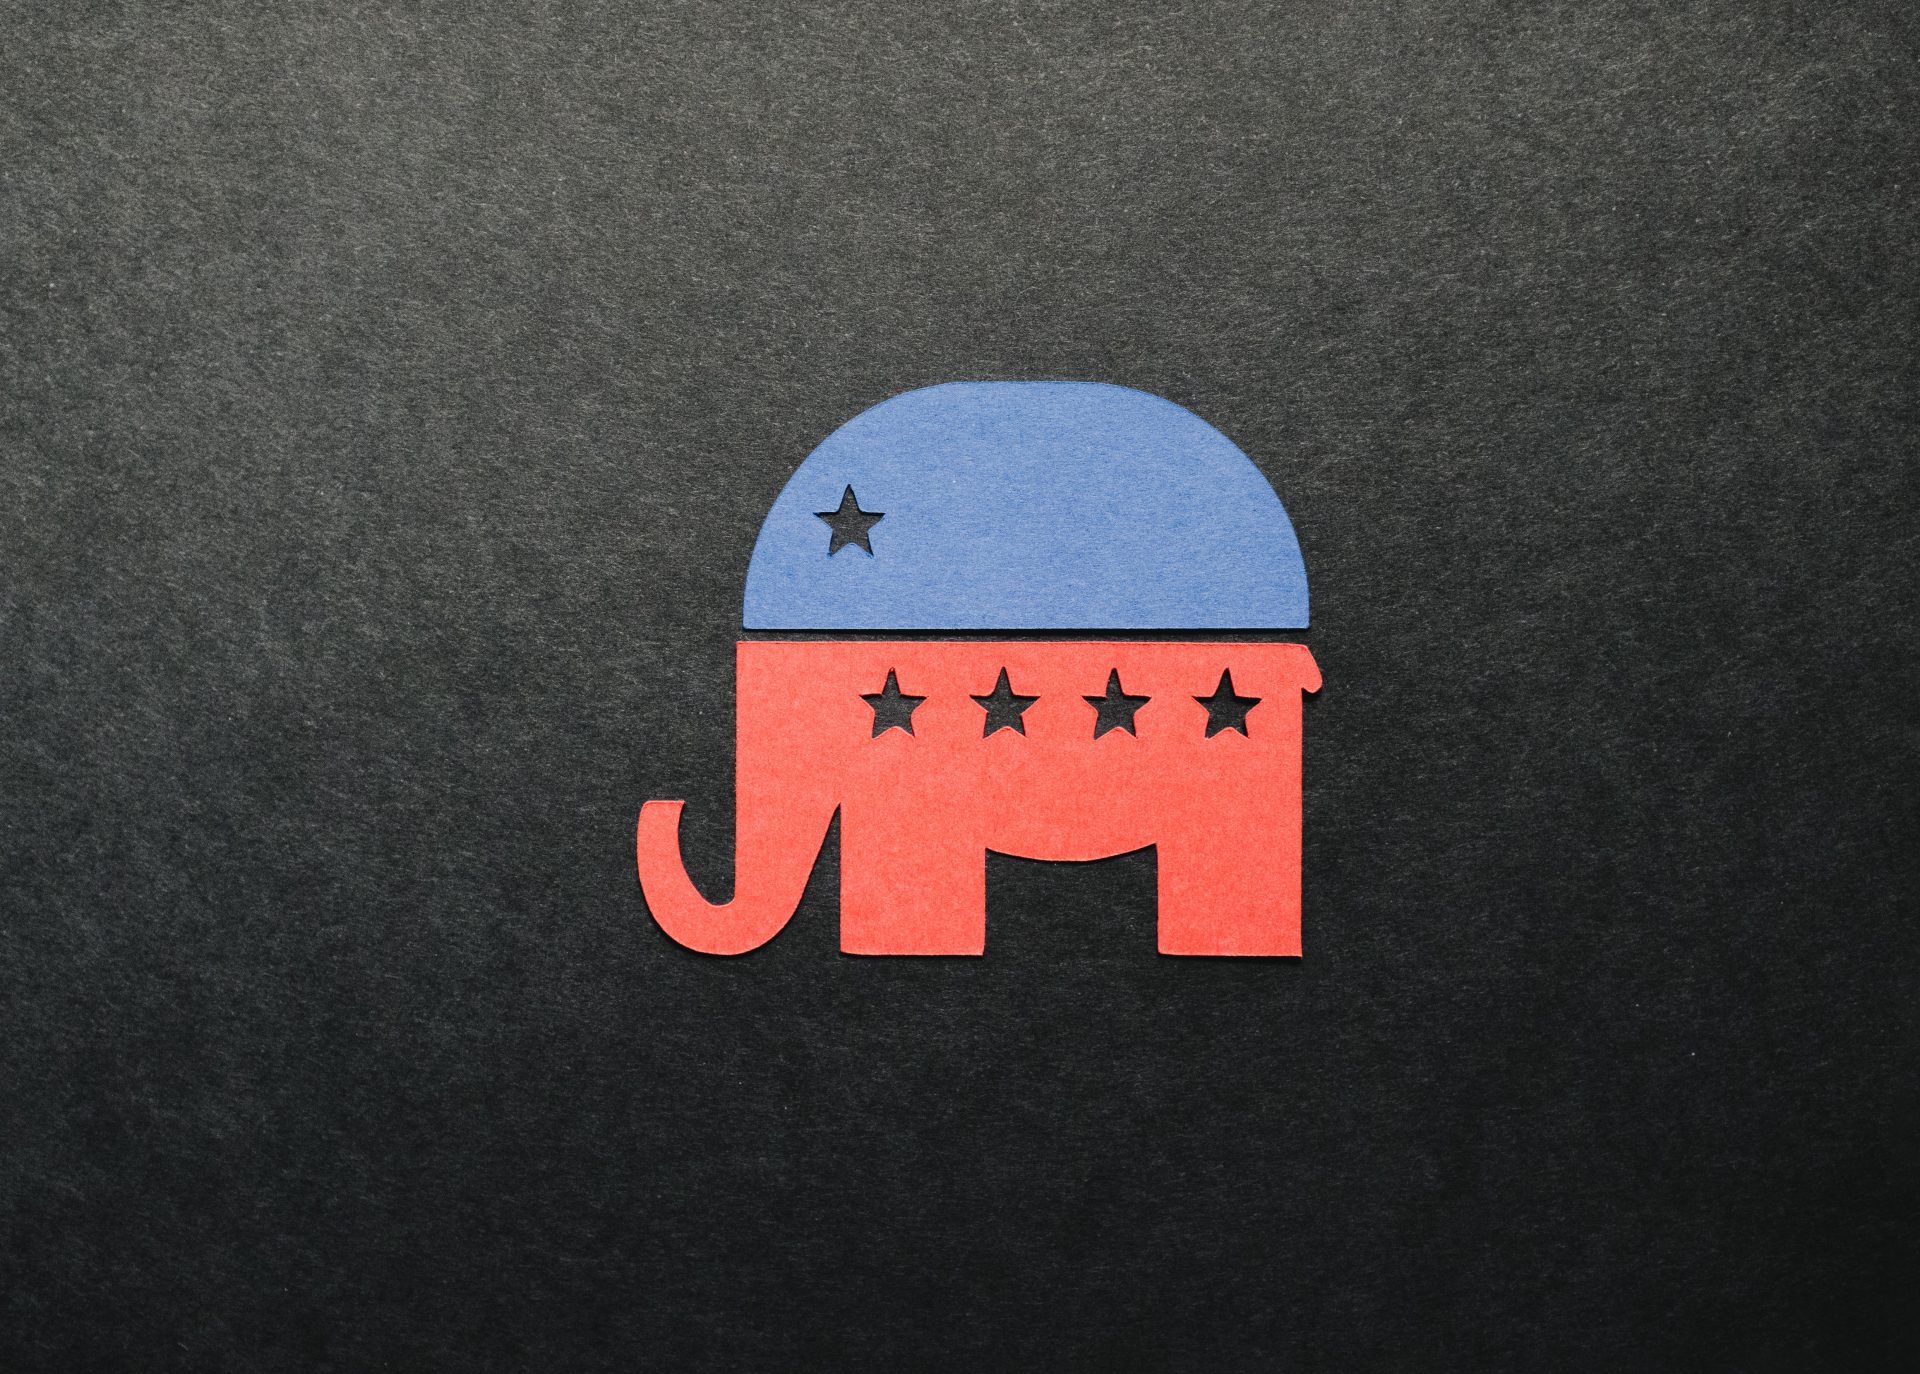 gop stands for